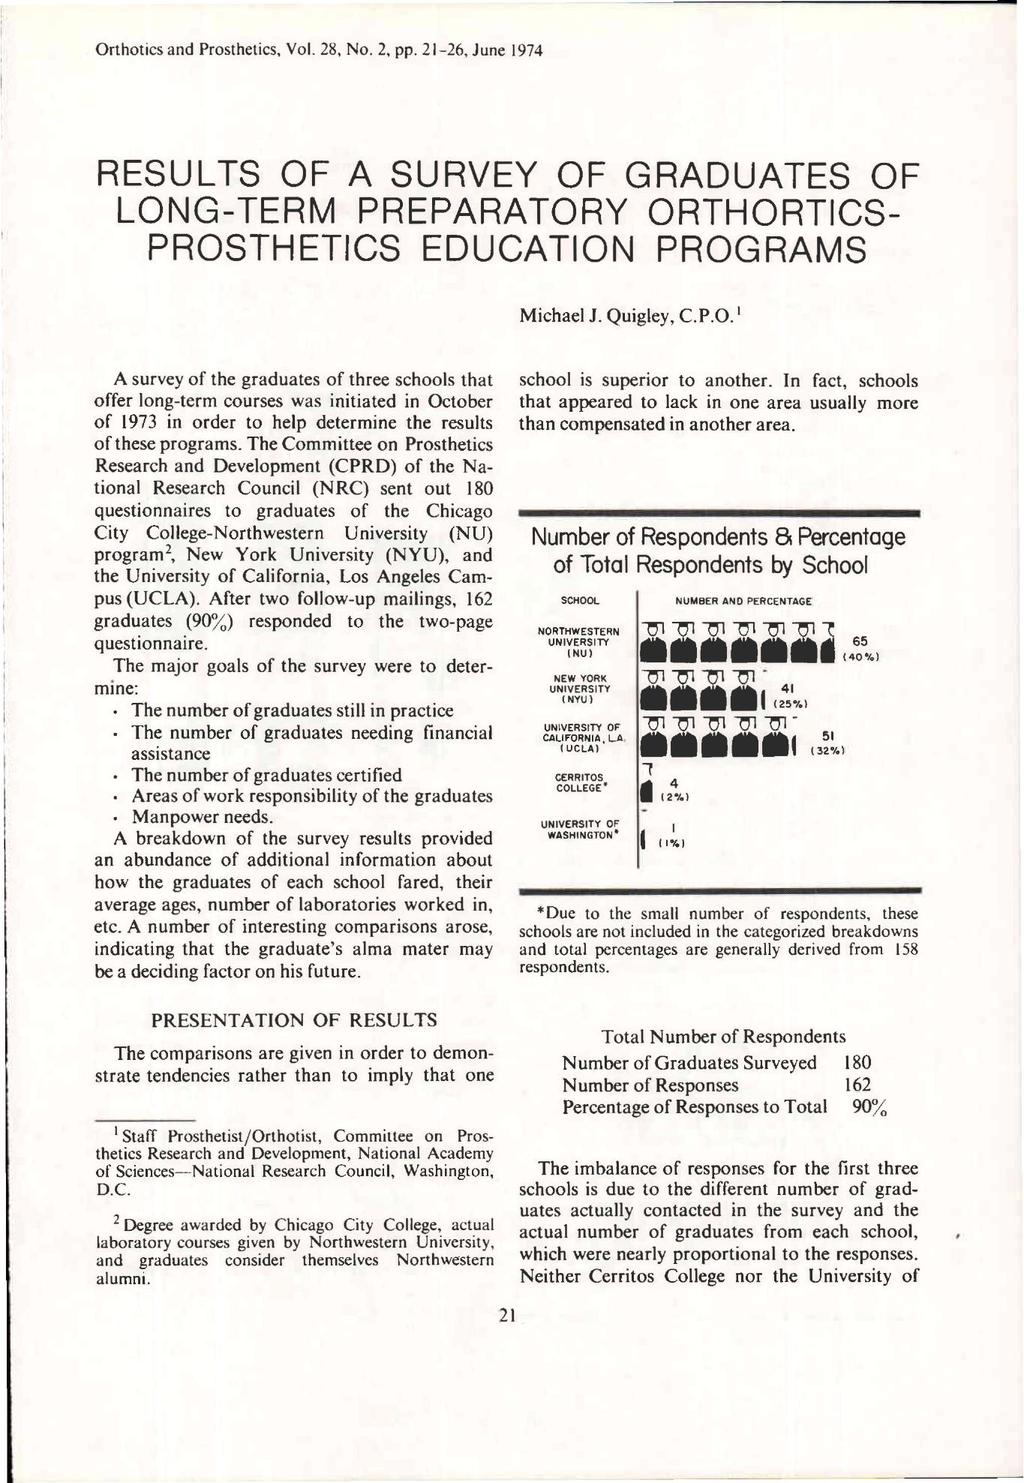 RESULTS OF A SURVEY OF GRADUATES OF LONG-TERM PREPARATORY ORTHORTICS- PROSTHETICS EDUCATION PROGRAMS Michael J. Quigley, C.P.O. A survey of the graduates of three schools that offer long-term courses was initiated in October of 1973 in order to help determine the results of these programs.